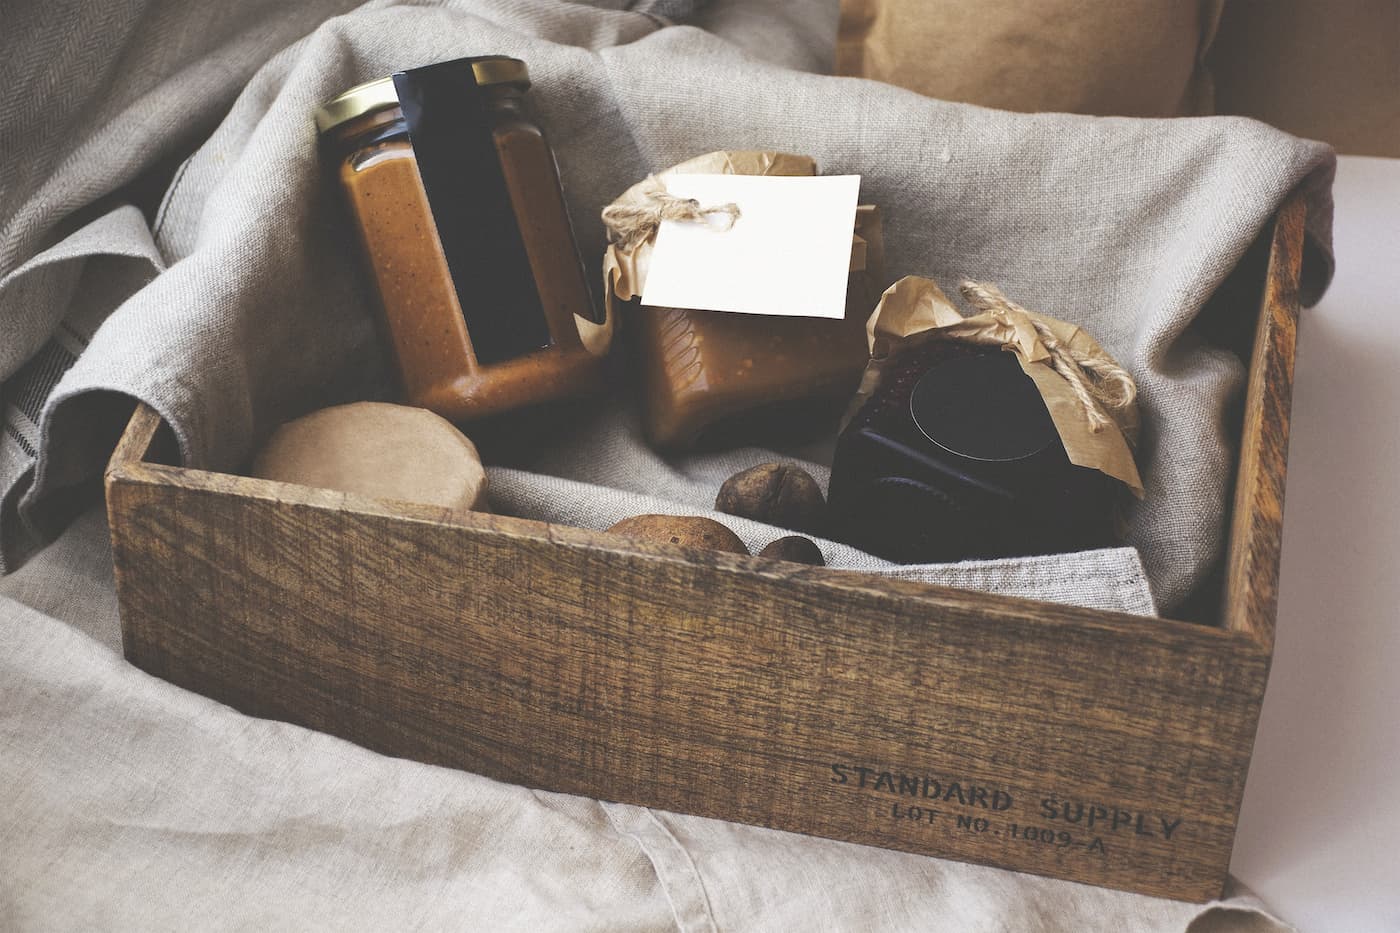 Gifts in a wooden gift box